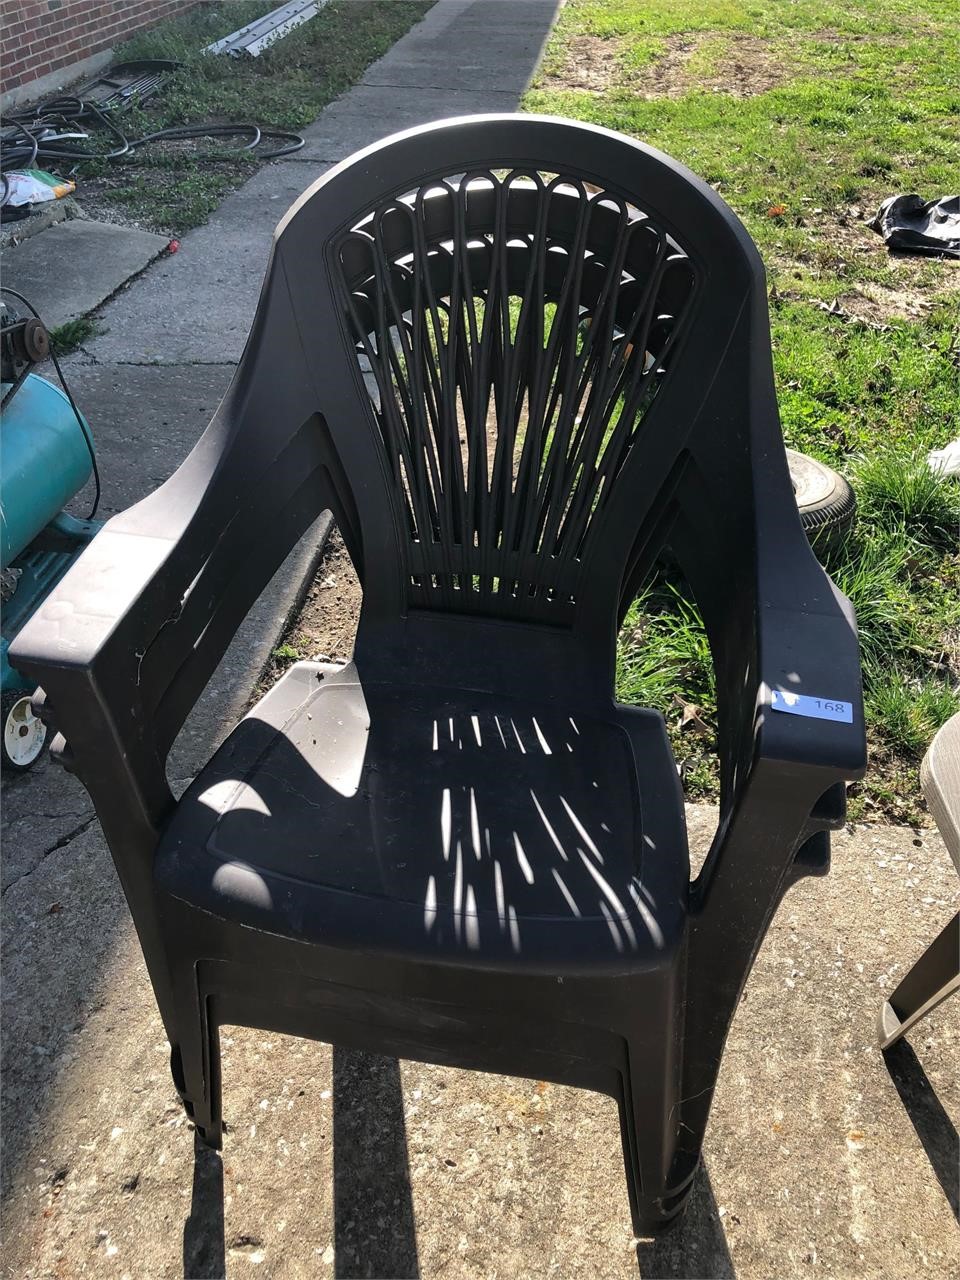 3 Matching Lawn Chairs